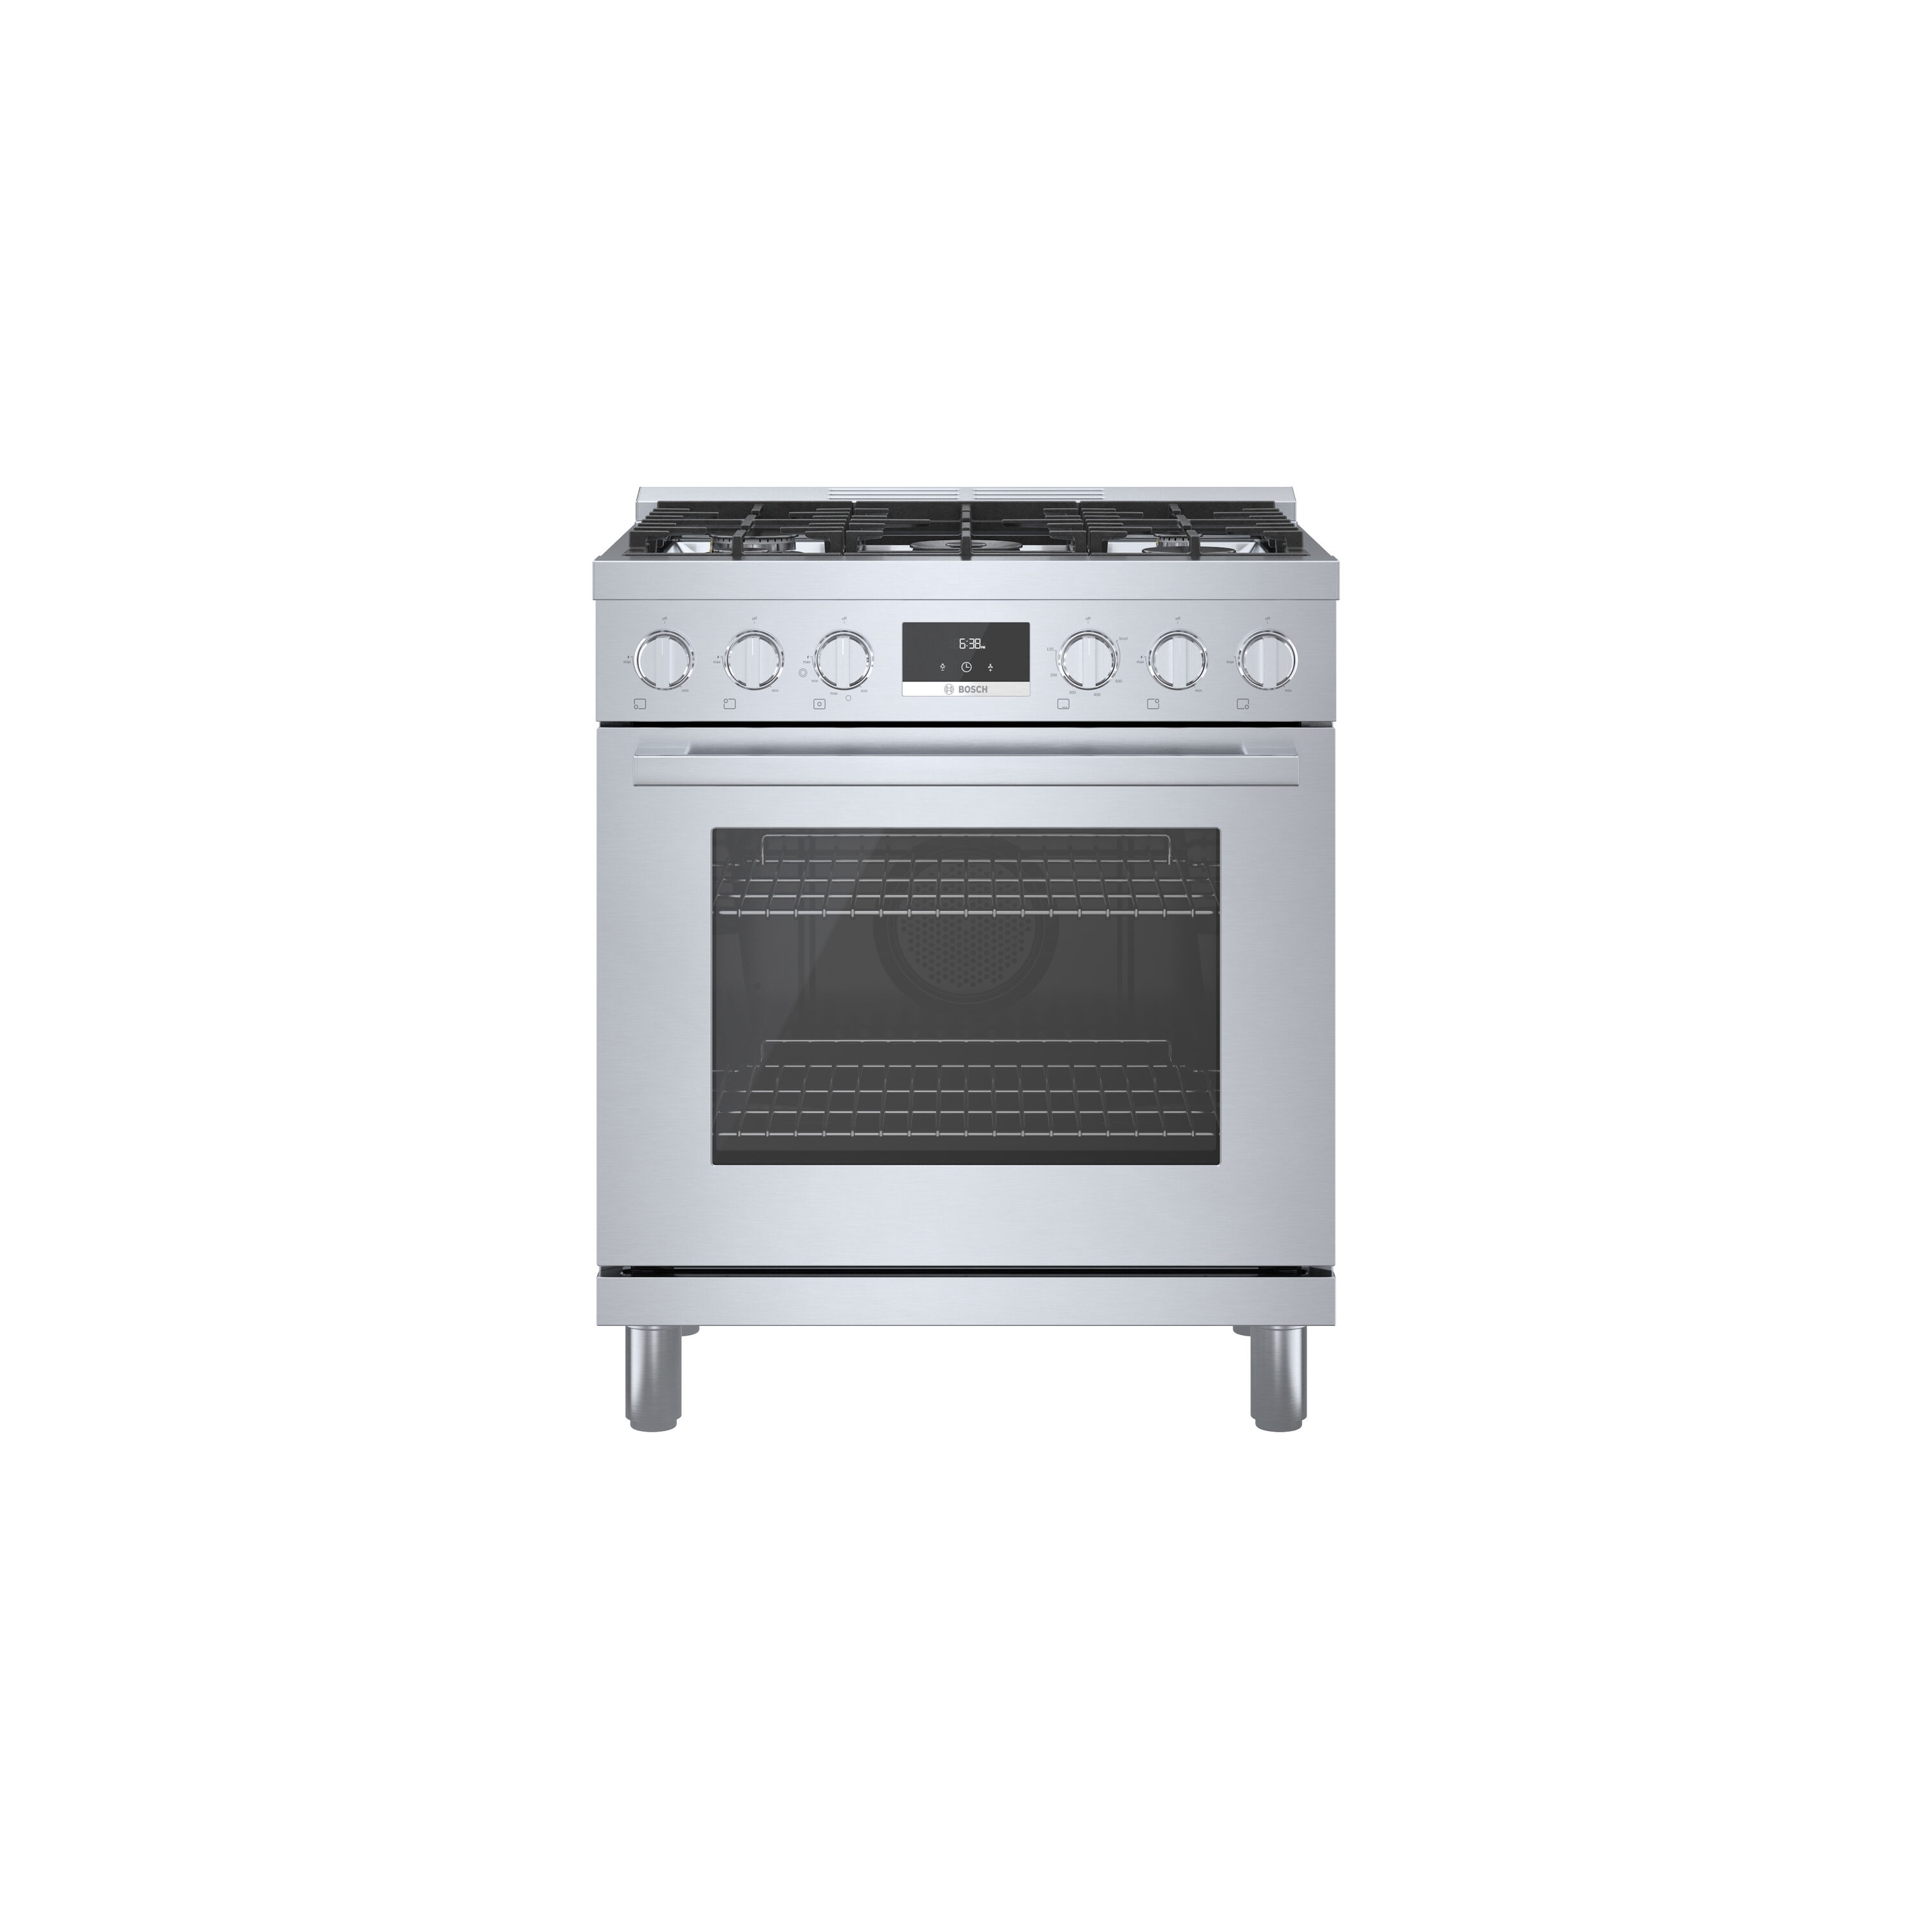 Thank you everyone for the recommendation for Bosch. : r/Appliances